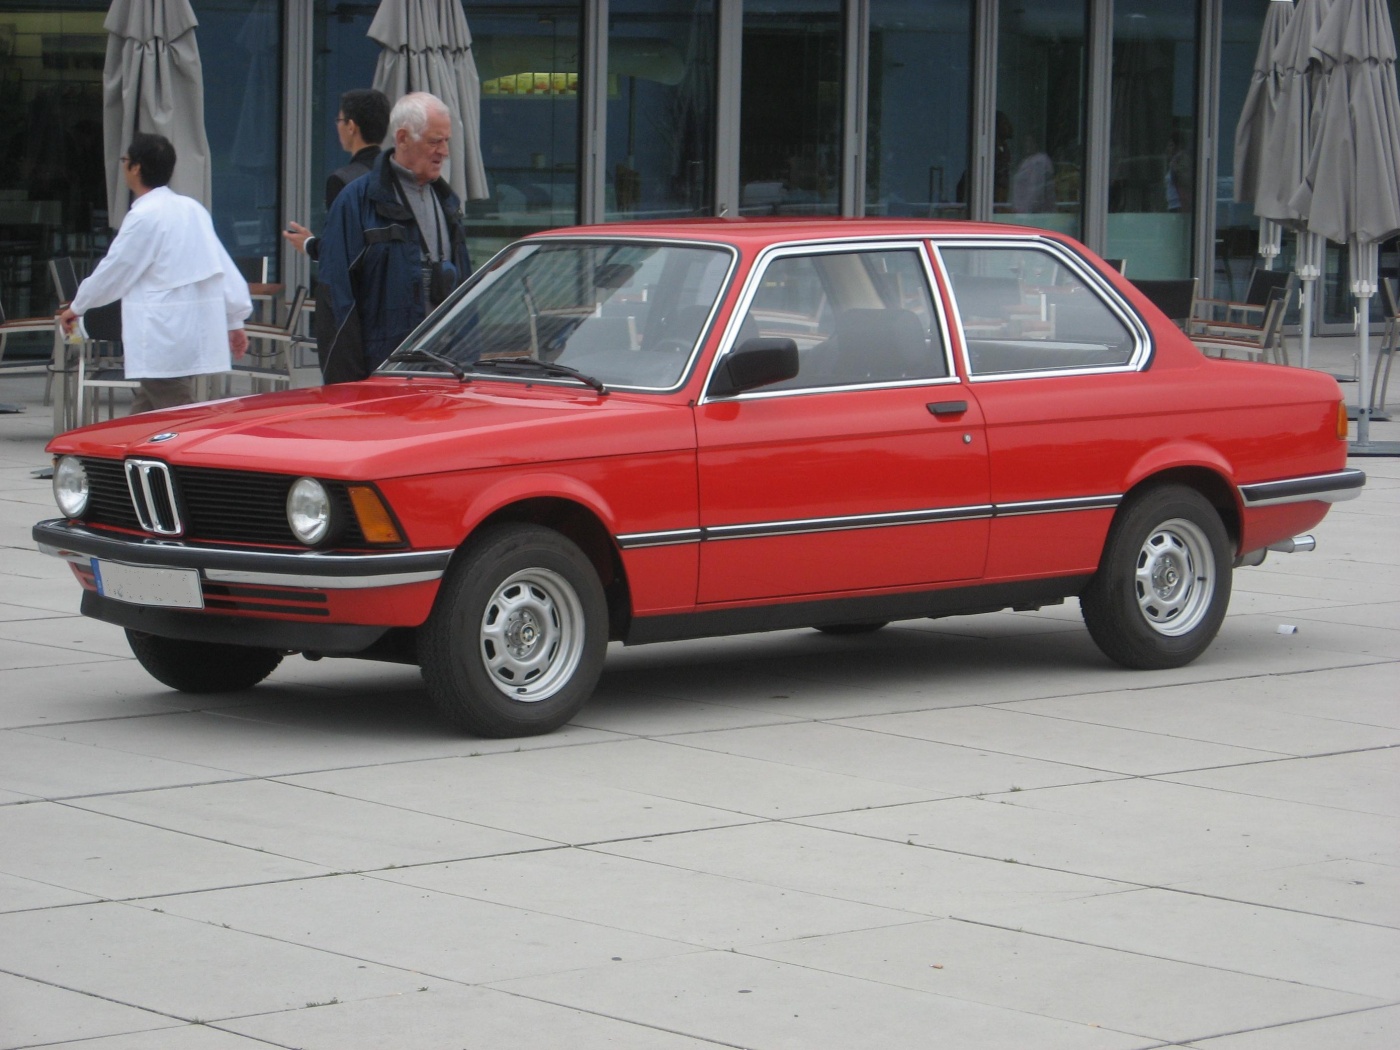 bmw_316-e21_front-view